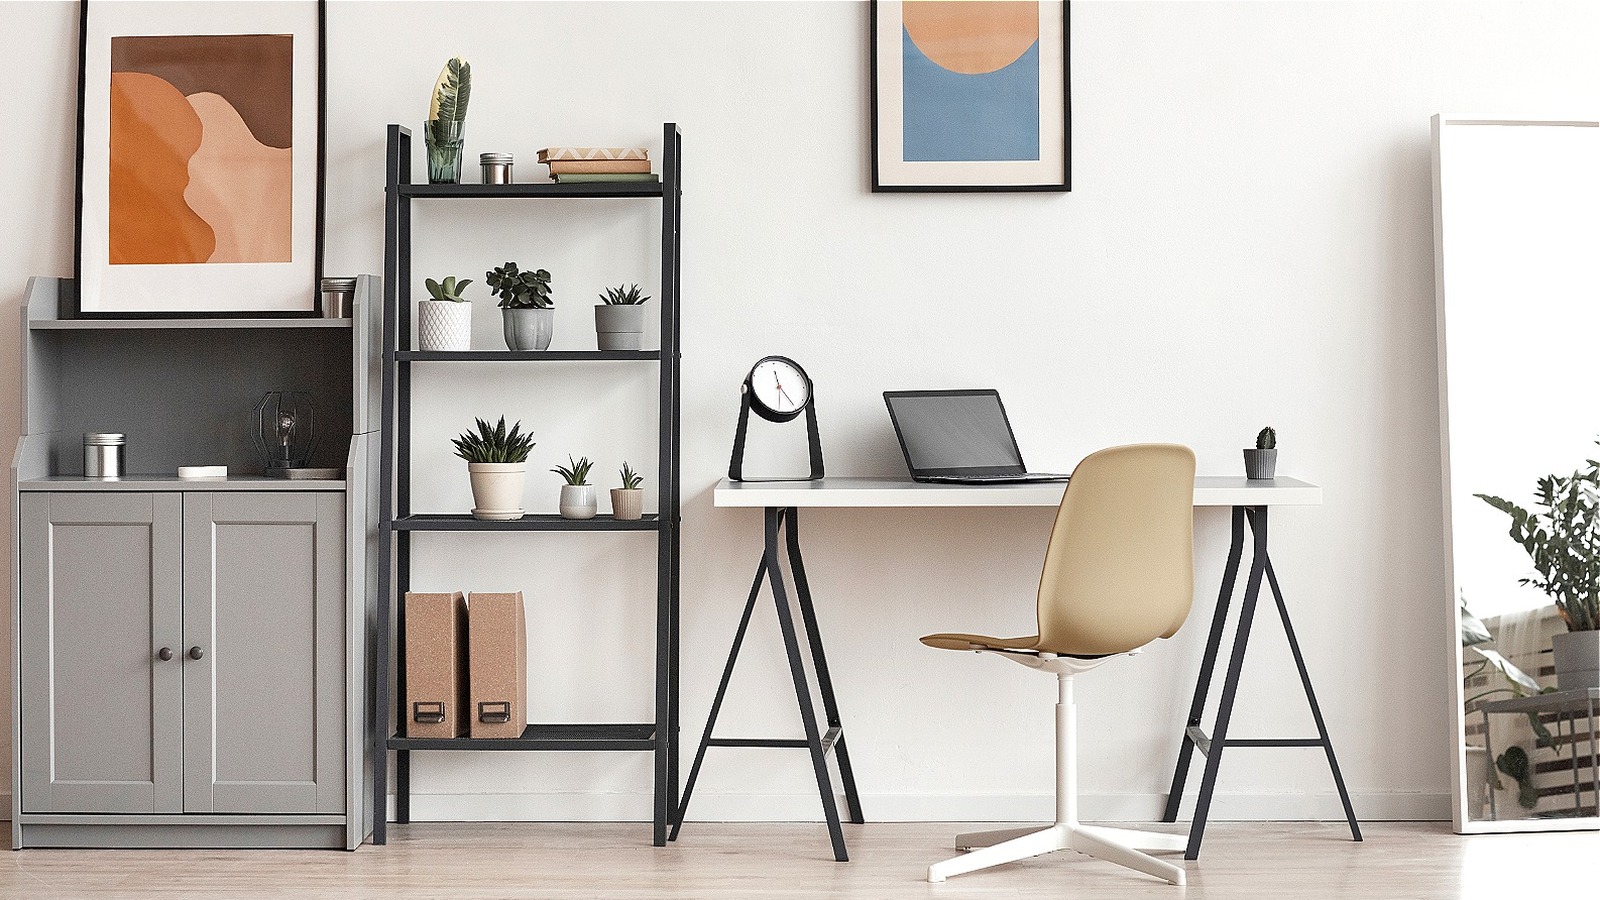 How The Right Color Desk Can Add Good Feng Shui To Your Home Office – House Digest